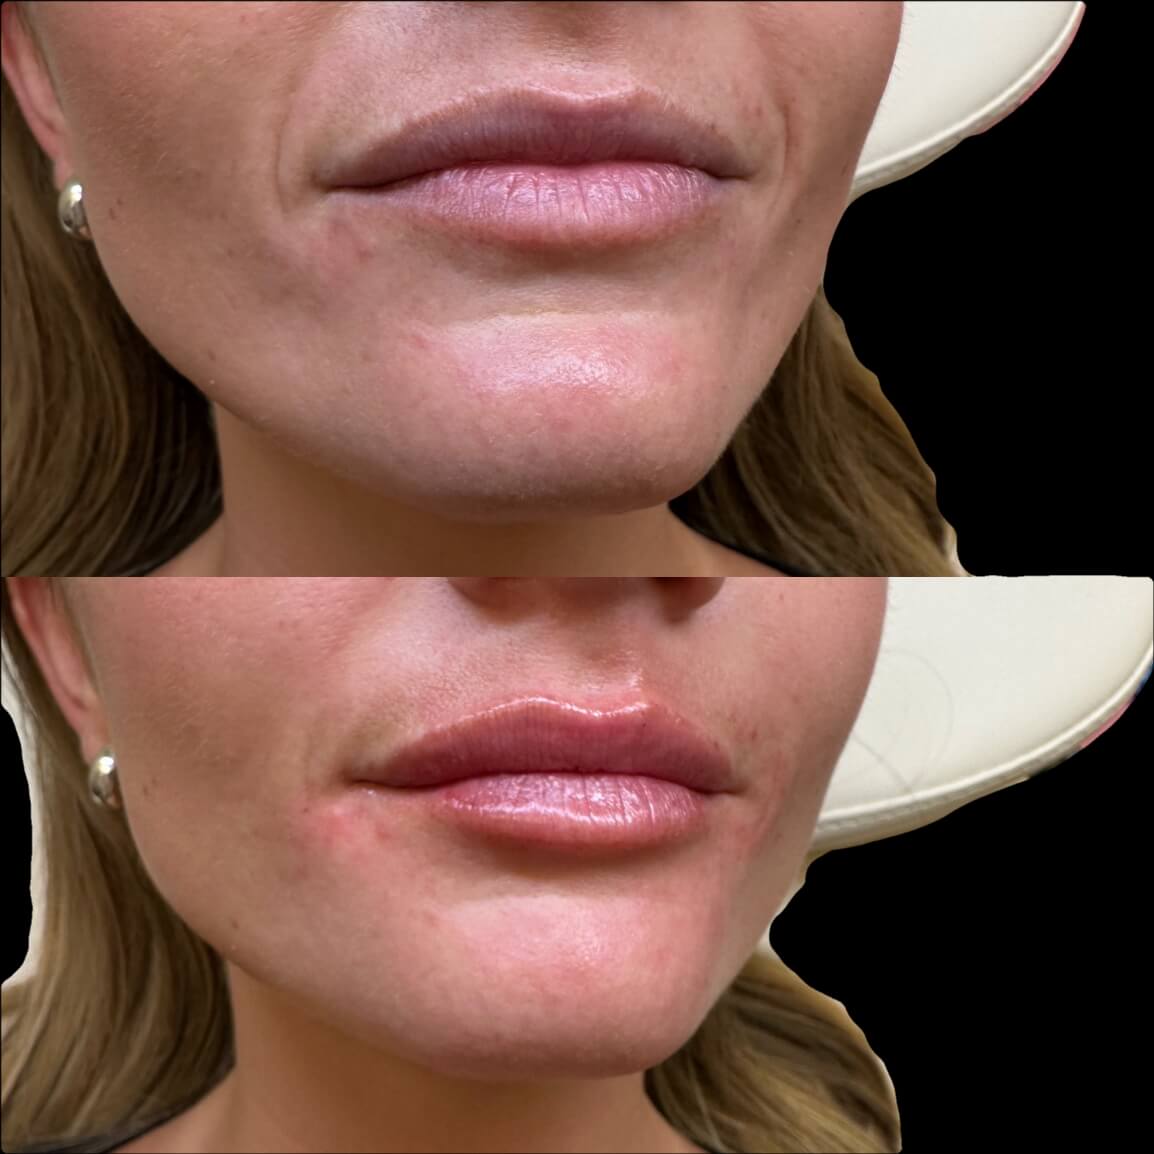 lip hydration treatment before and after photos